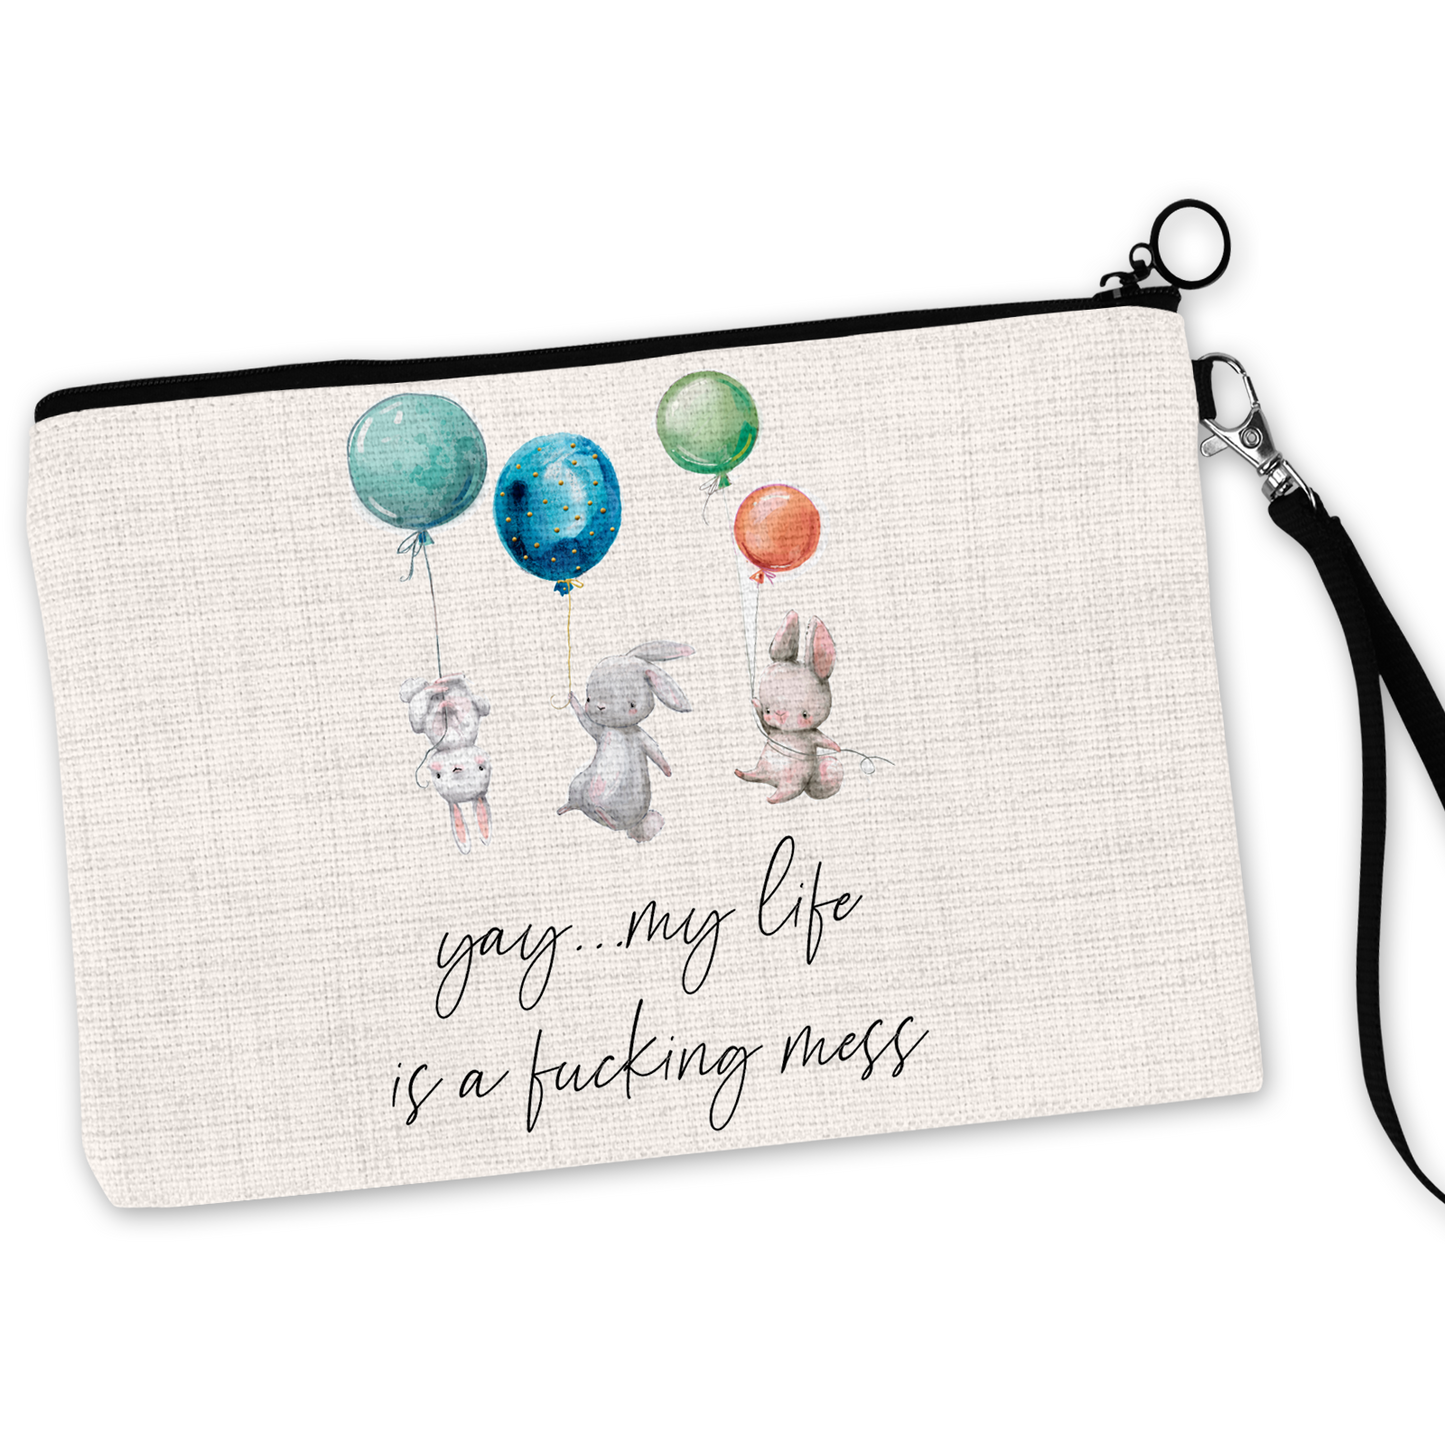 Yay .. My Life Is A Fucking Mess Cosmetic Bag